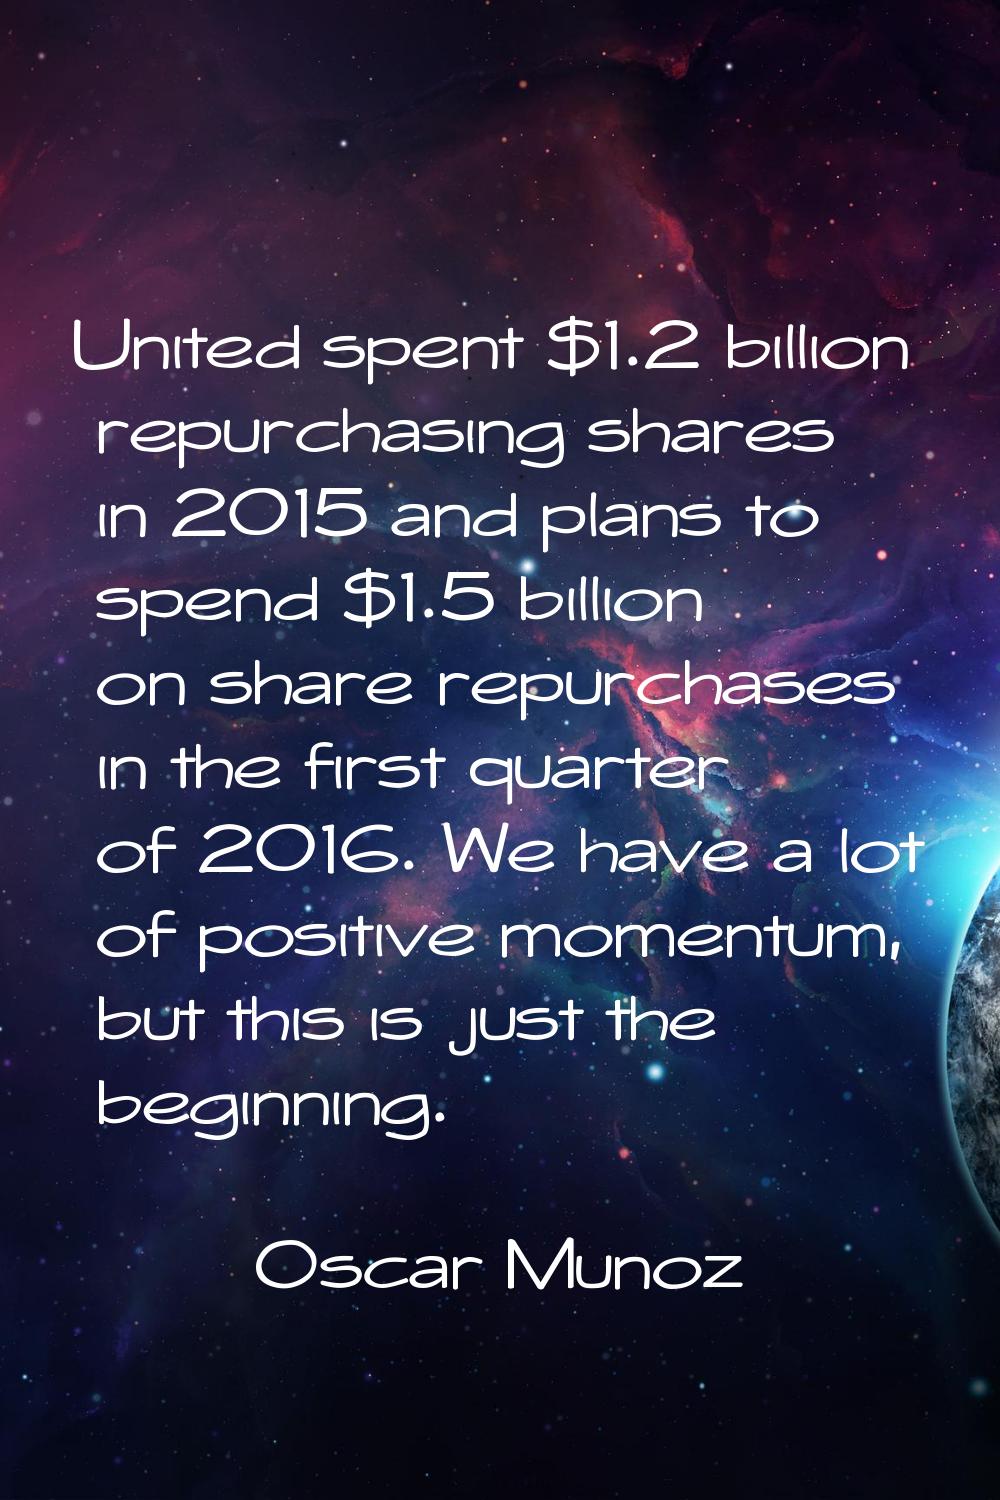 United spent $1.2 billion repurchasing shares in 2015 and plans to spend $1.5 billion on share repu